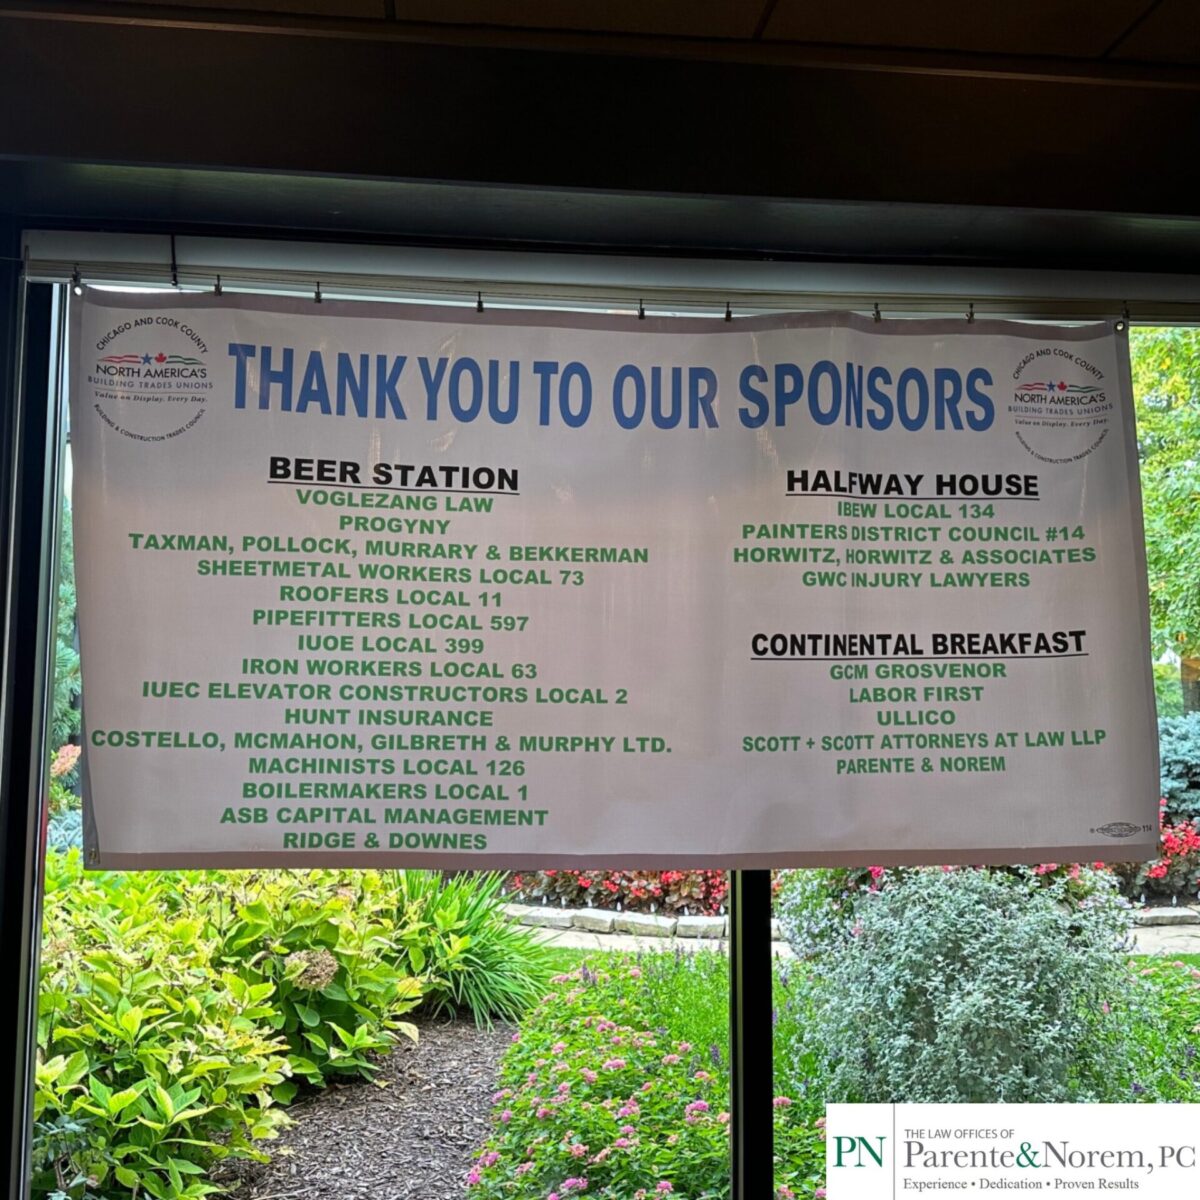 P&N BLOG | The Law Offices of Parente & Norem, P.C. Supports Chicago & Cook County Building Trades Golf Outing